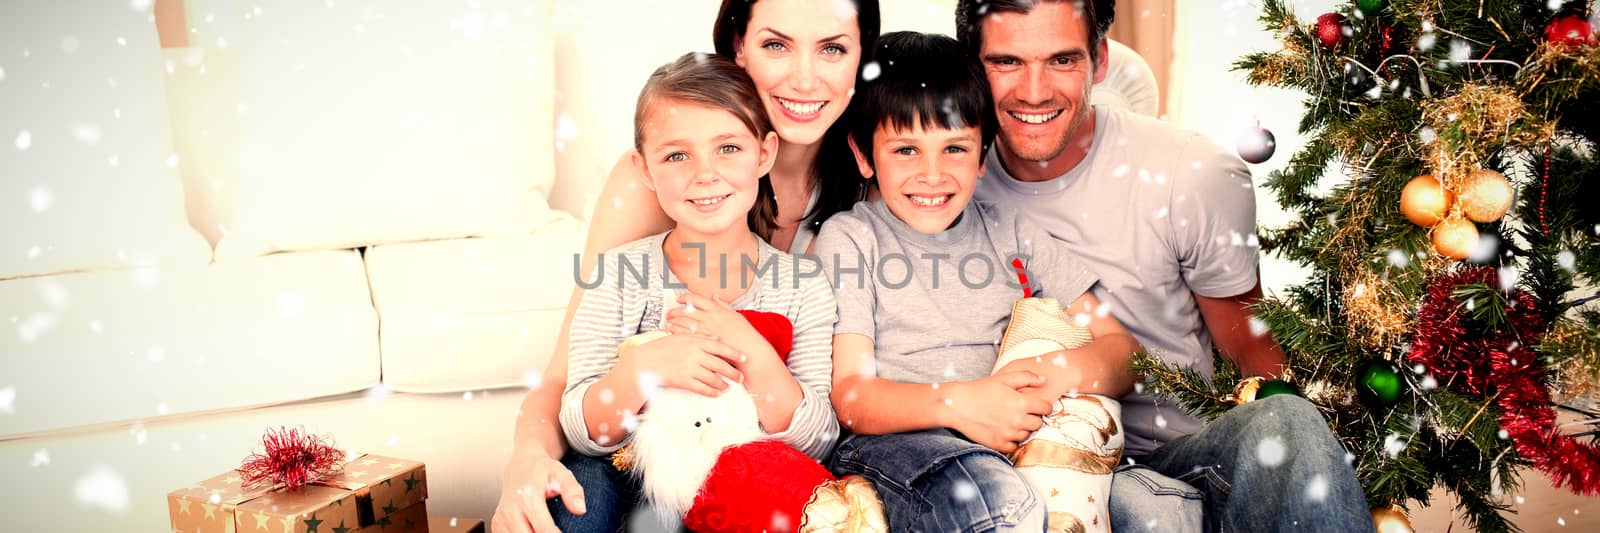 Composite image of happy family at christmas time holding lots of presents by Wavebreakmedia